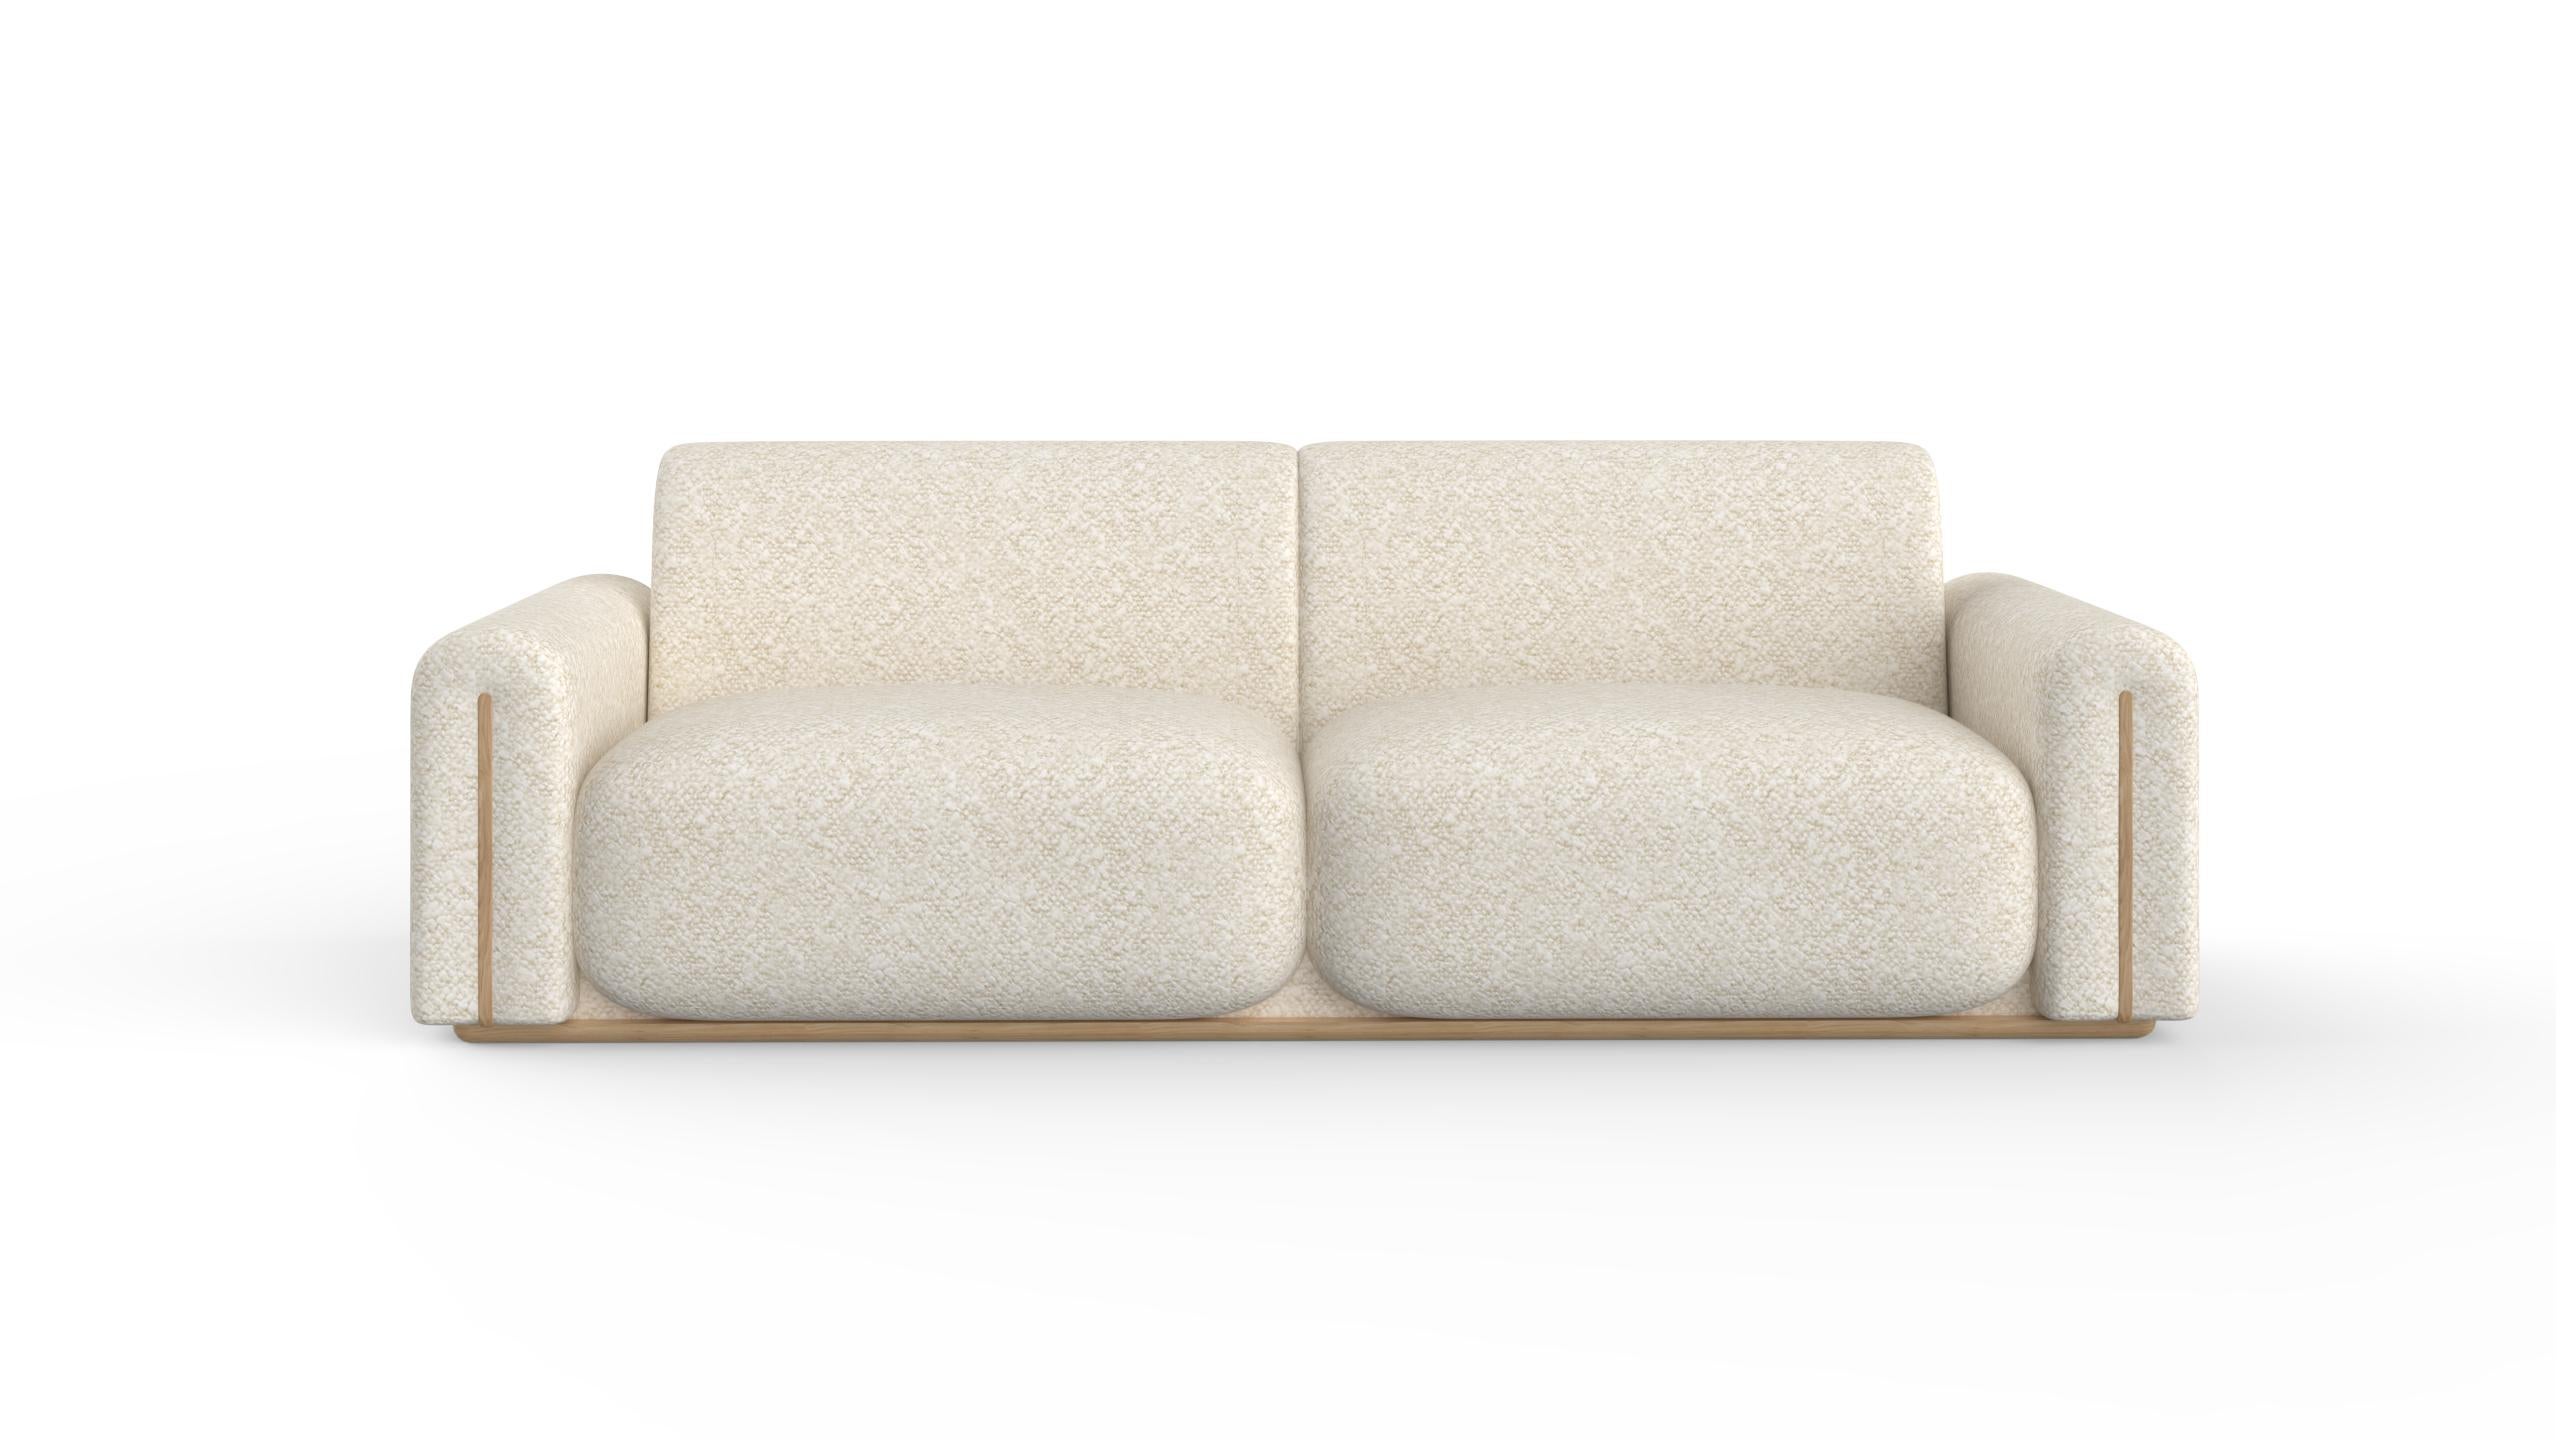 Beijinho Sofa, Contemporary Collection, Handcrafted in Portugal - Europe by Greenapple.

The Beijinho seamlessly combines the soft texture of the DEDAR cotton-wool bouclé and enveloping, tufted comfort, creating a sensory experience reminiscent of a